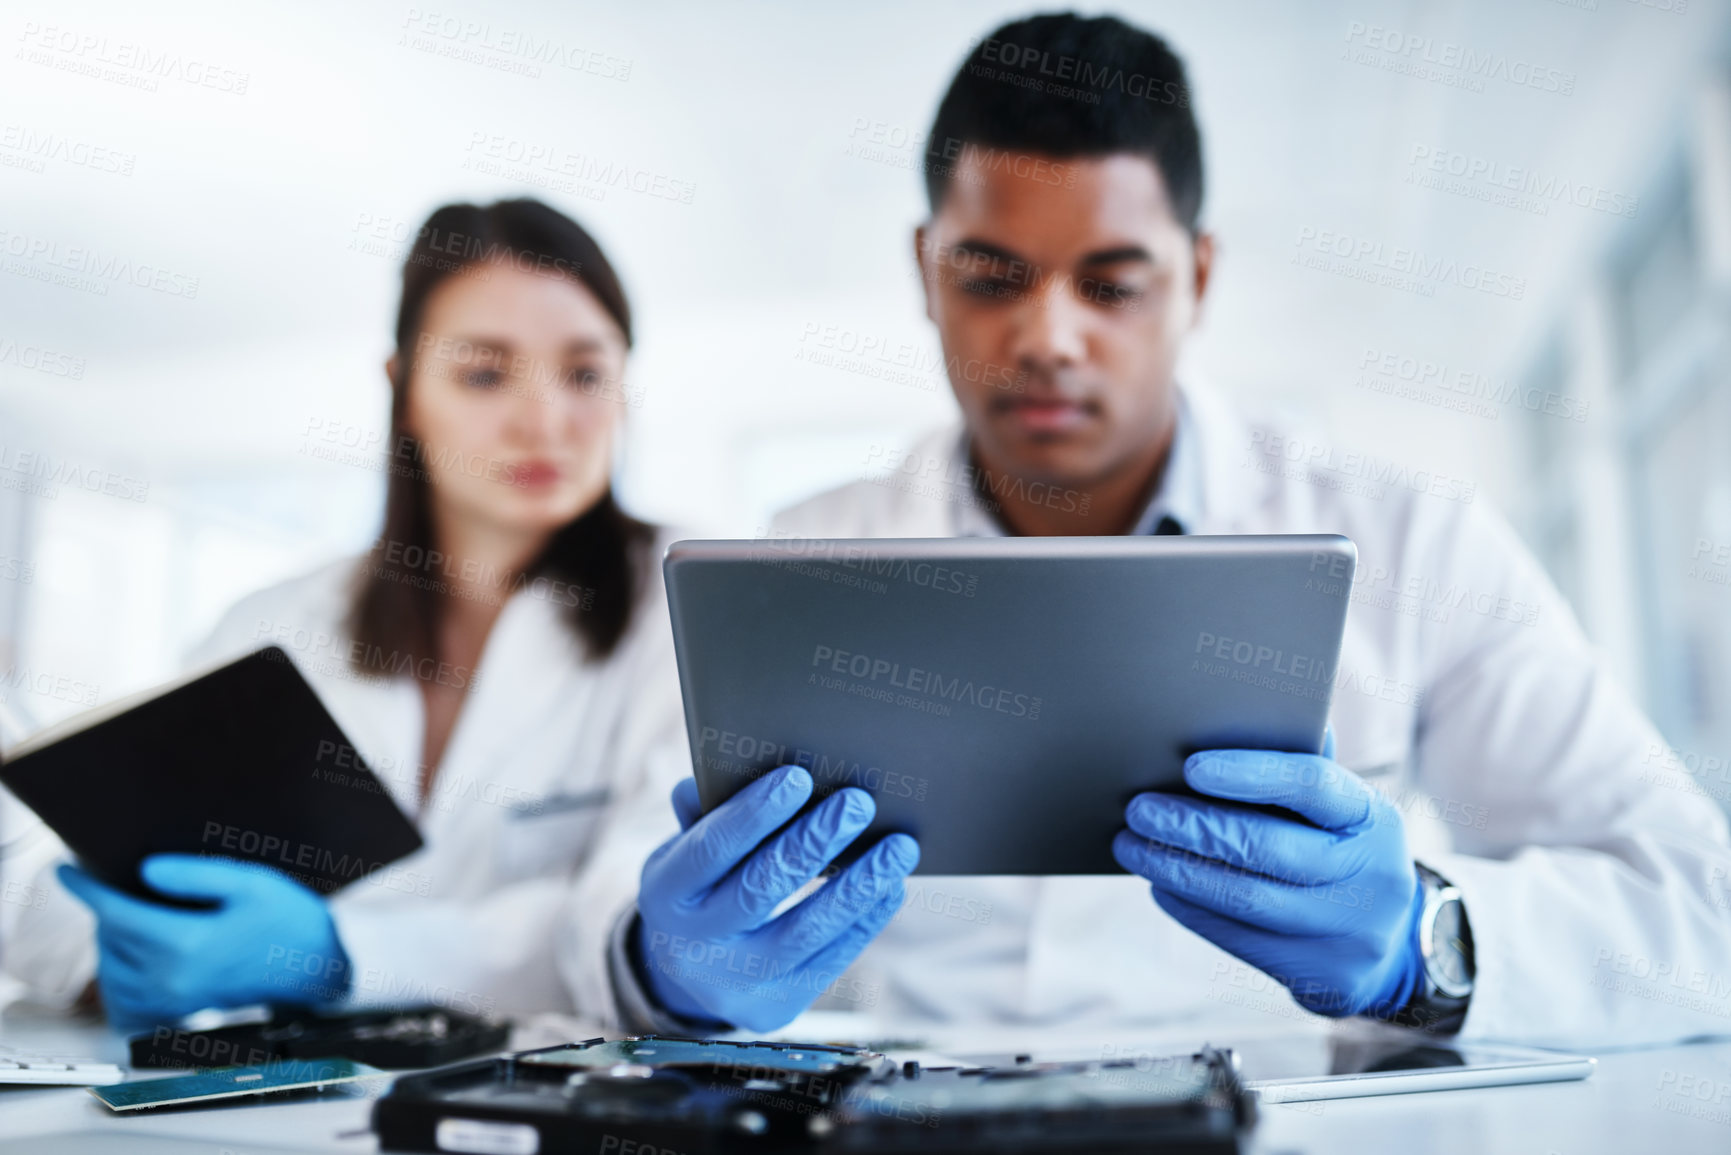 Buy stock photo Shot of a young man and woman using a digital tablet while repairing computer hardware in a laboratory